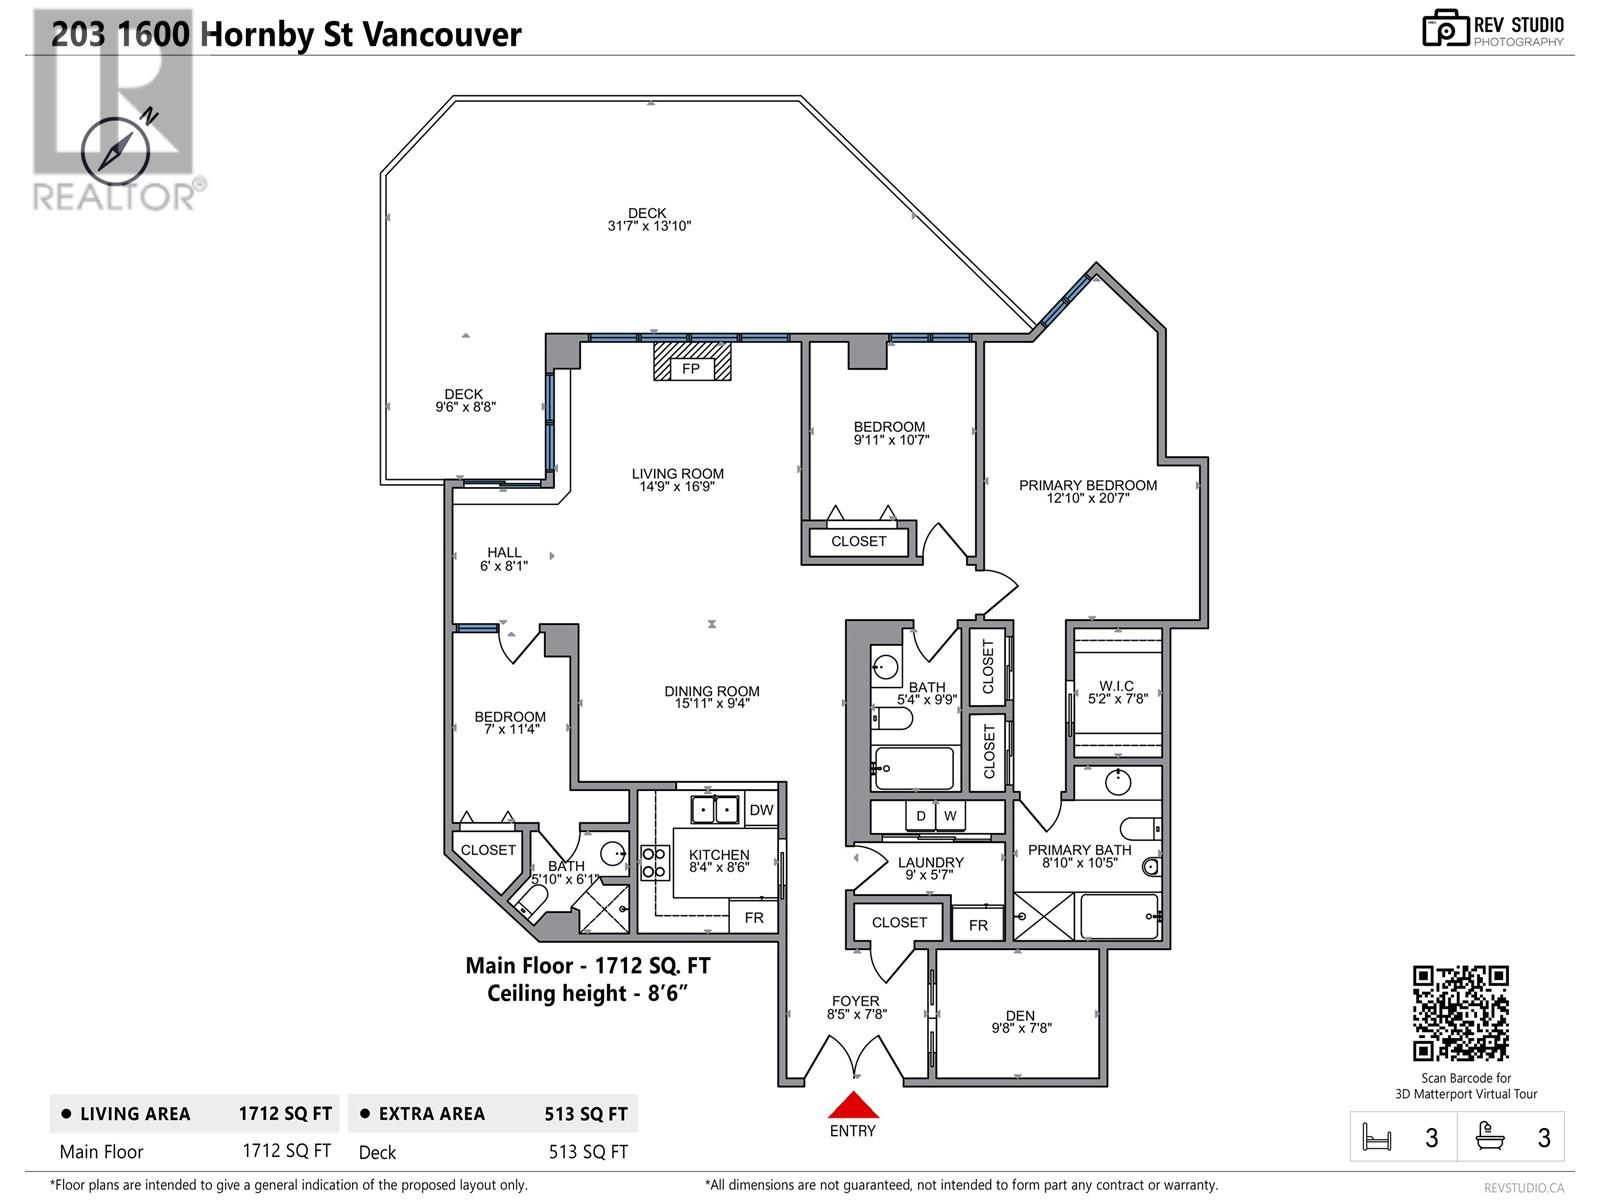 Listing Picture 30 of 30 : 203 1600 HORNBY STREET, Vancouver / 溫哥華 - 魯藝地產 Yvonne Lu Group - MLS Medallion Club Member